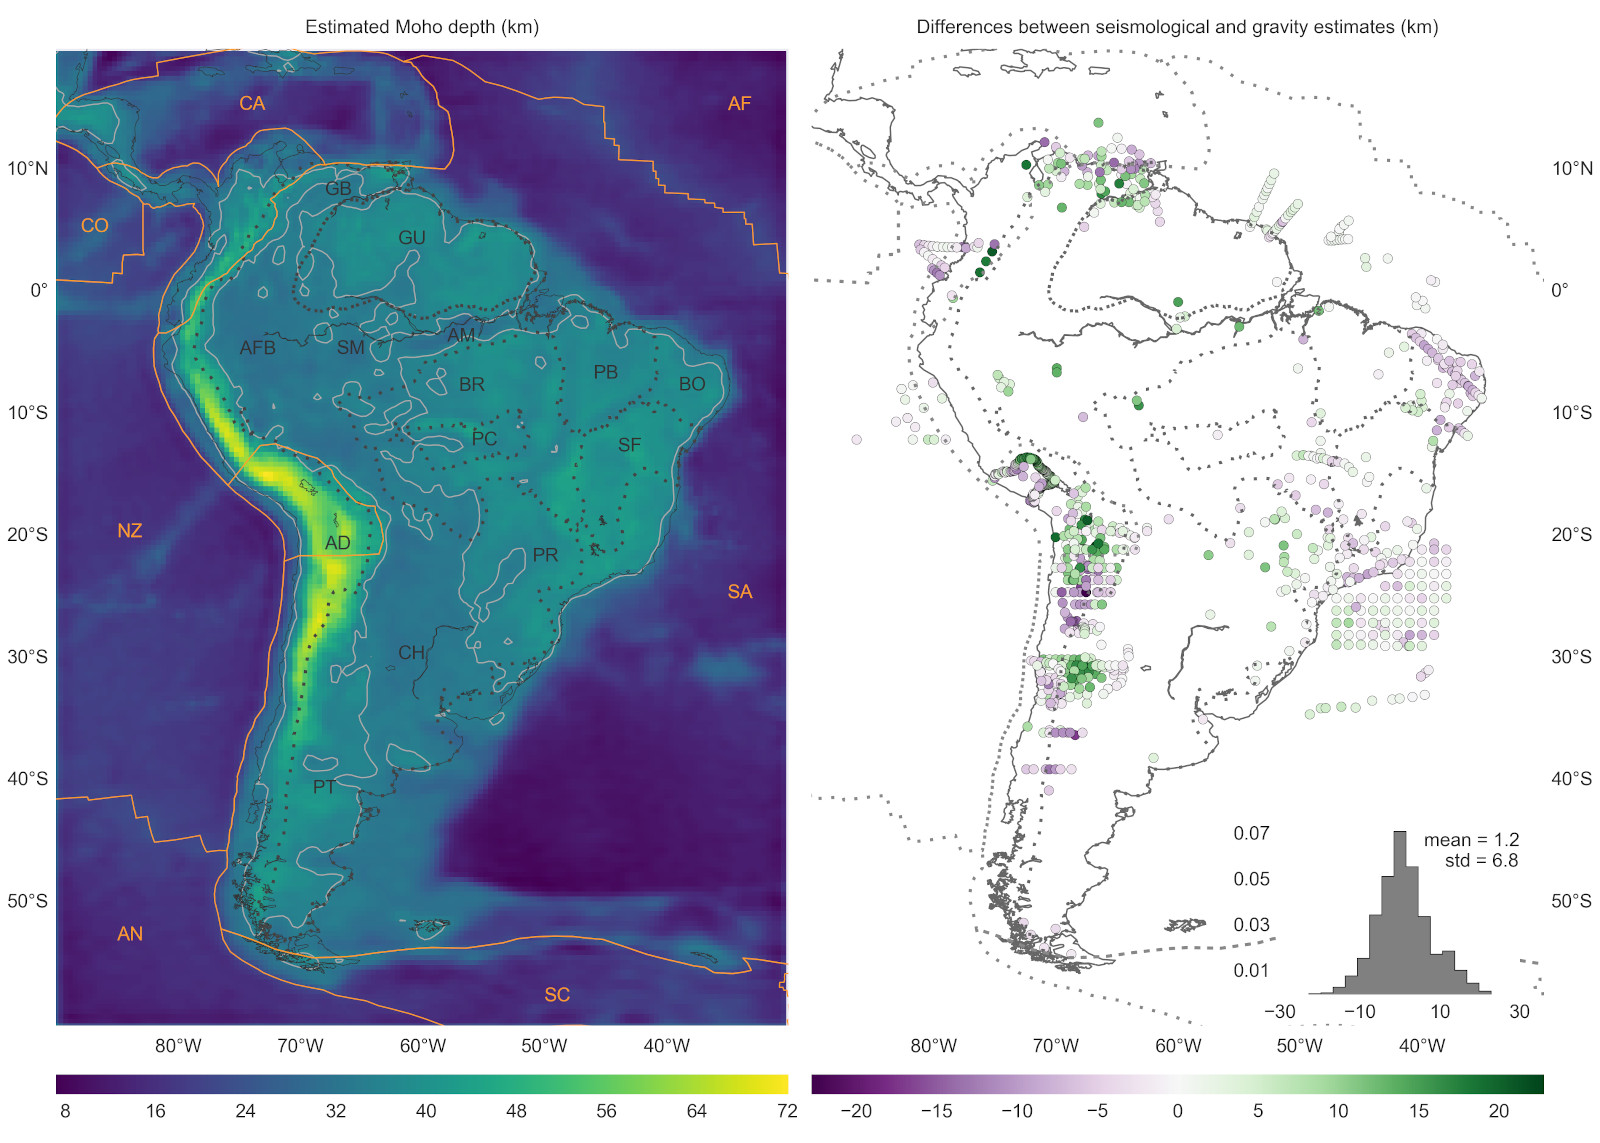 Maps of the depth to the crust-mantle boundary under South America (left) and differences between gravity- and seismologically-derived depths (right).